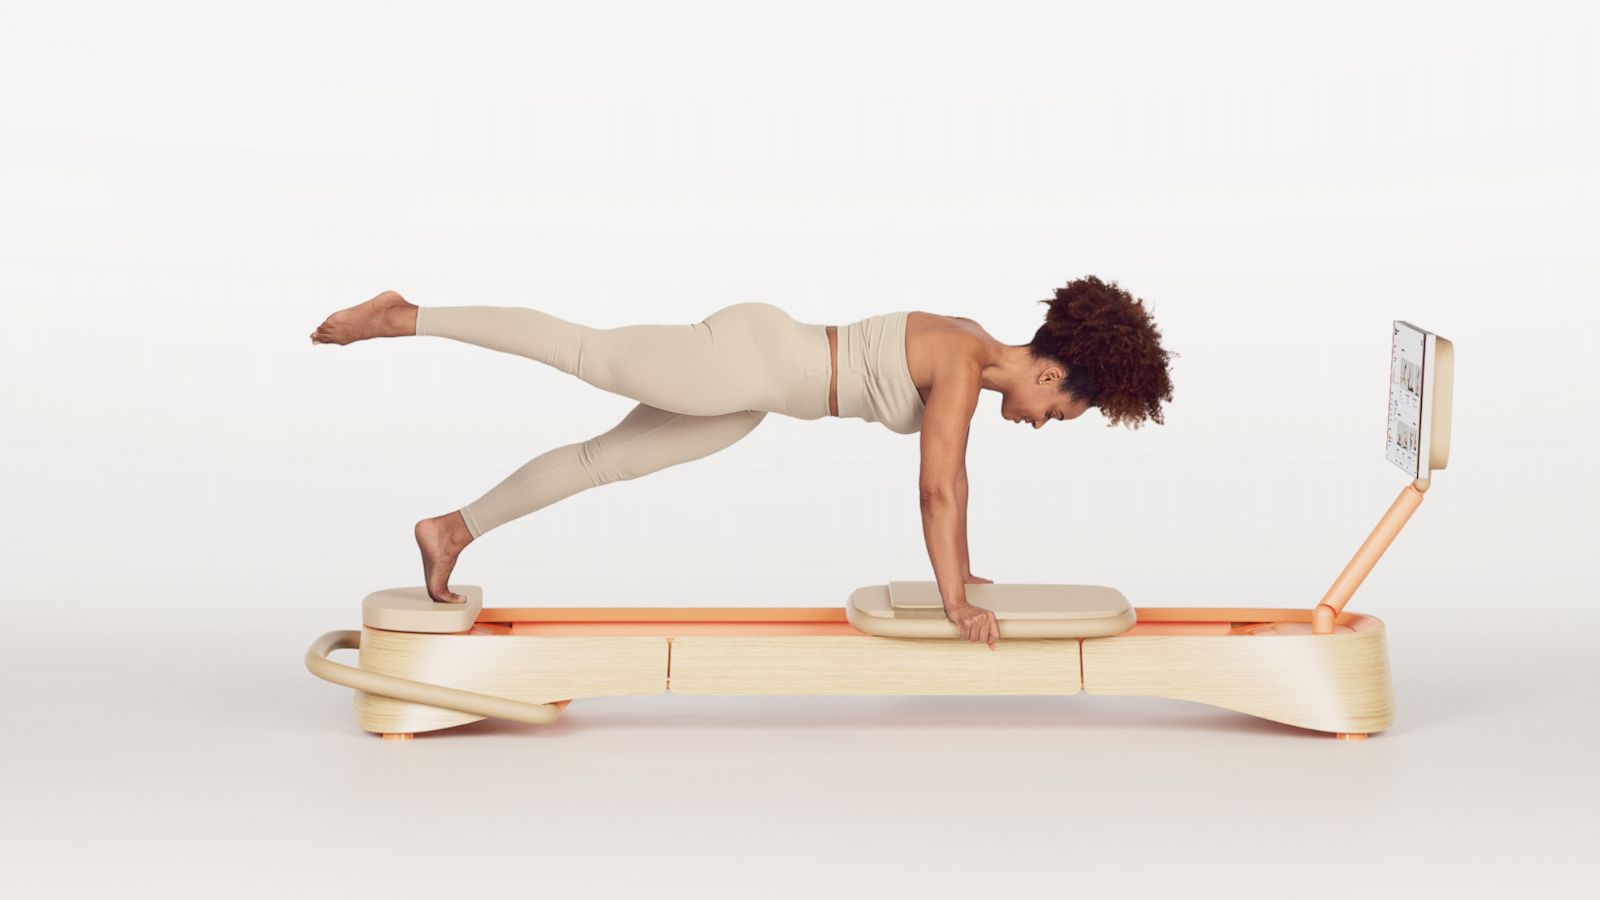 What to look for in a Pilates reformer, according to experts